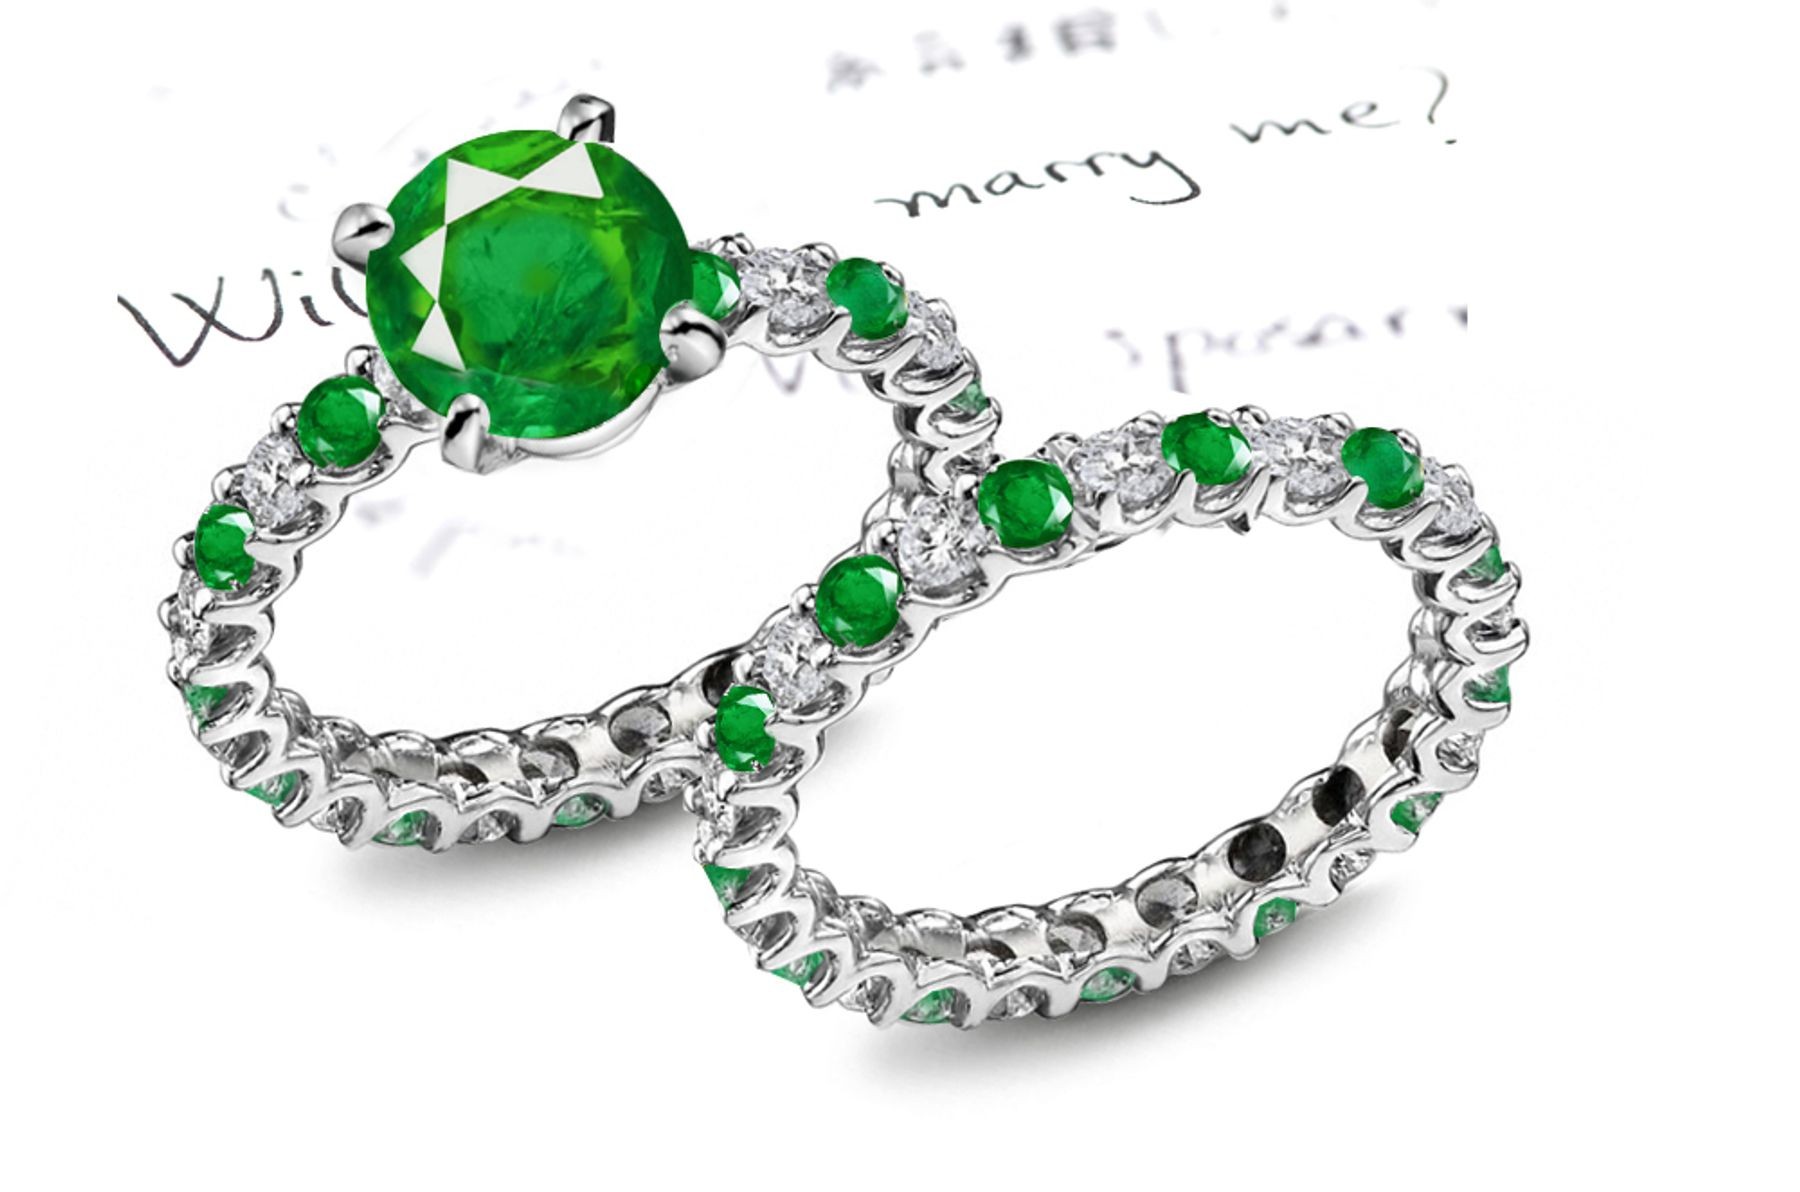 Gold & Emeralds: View A Round Emerald atop Claw Set Emerald & Diamond Ring & Birthstone Eternity Band